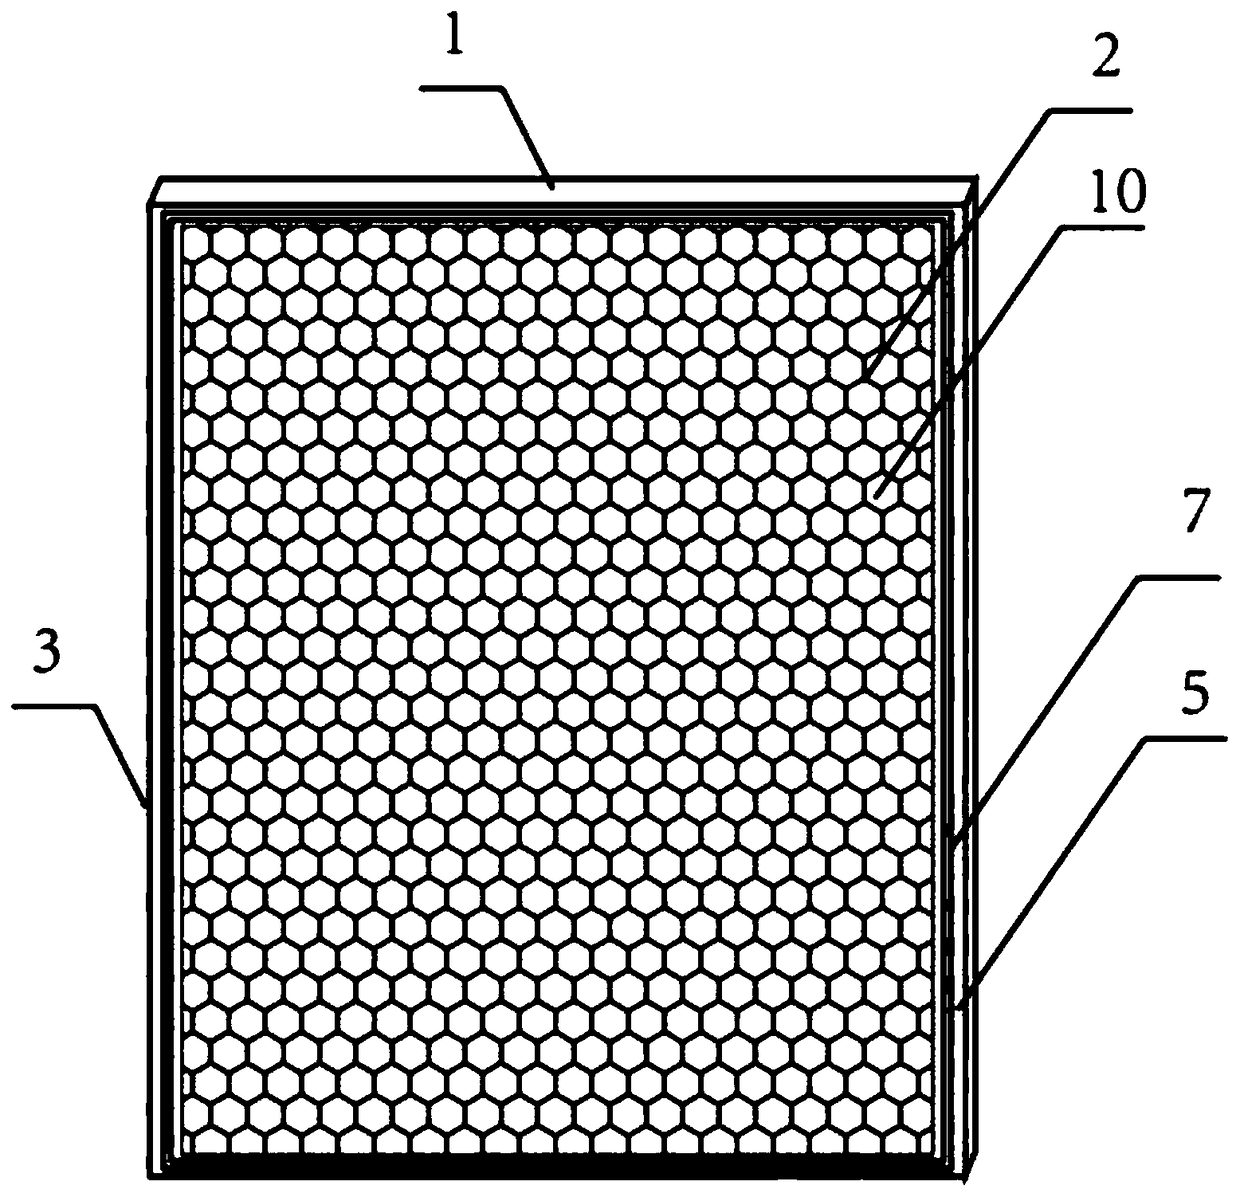 Filter net based on formaldehyde purification function